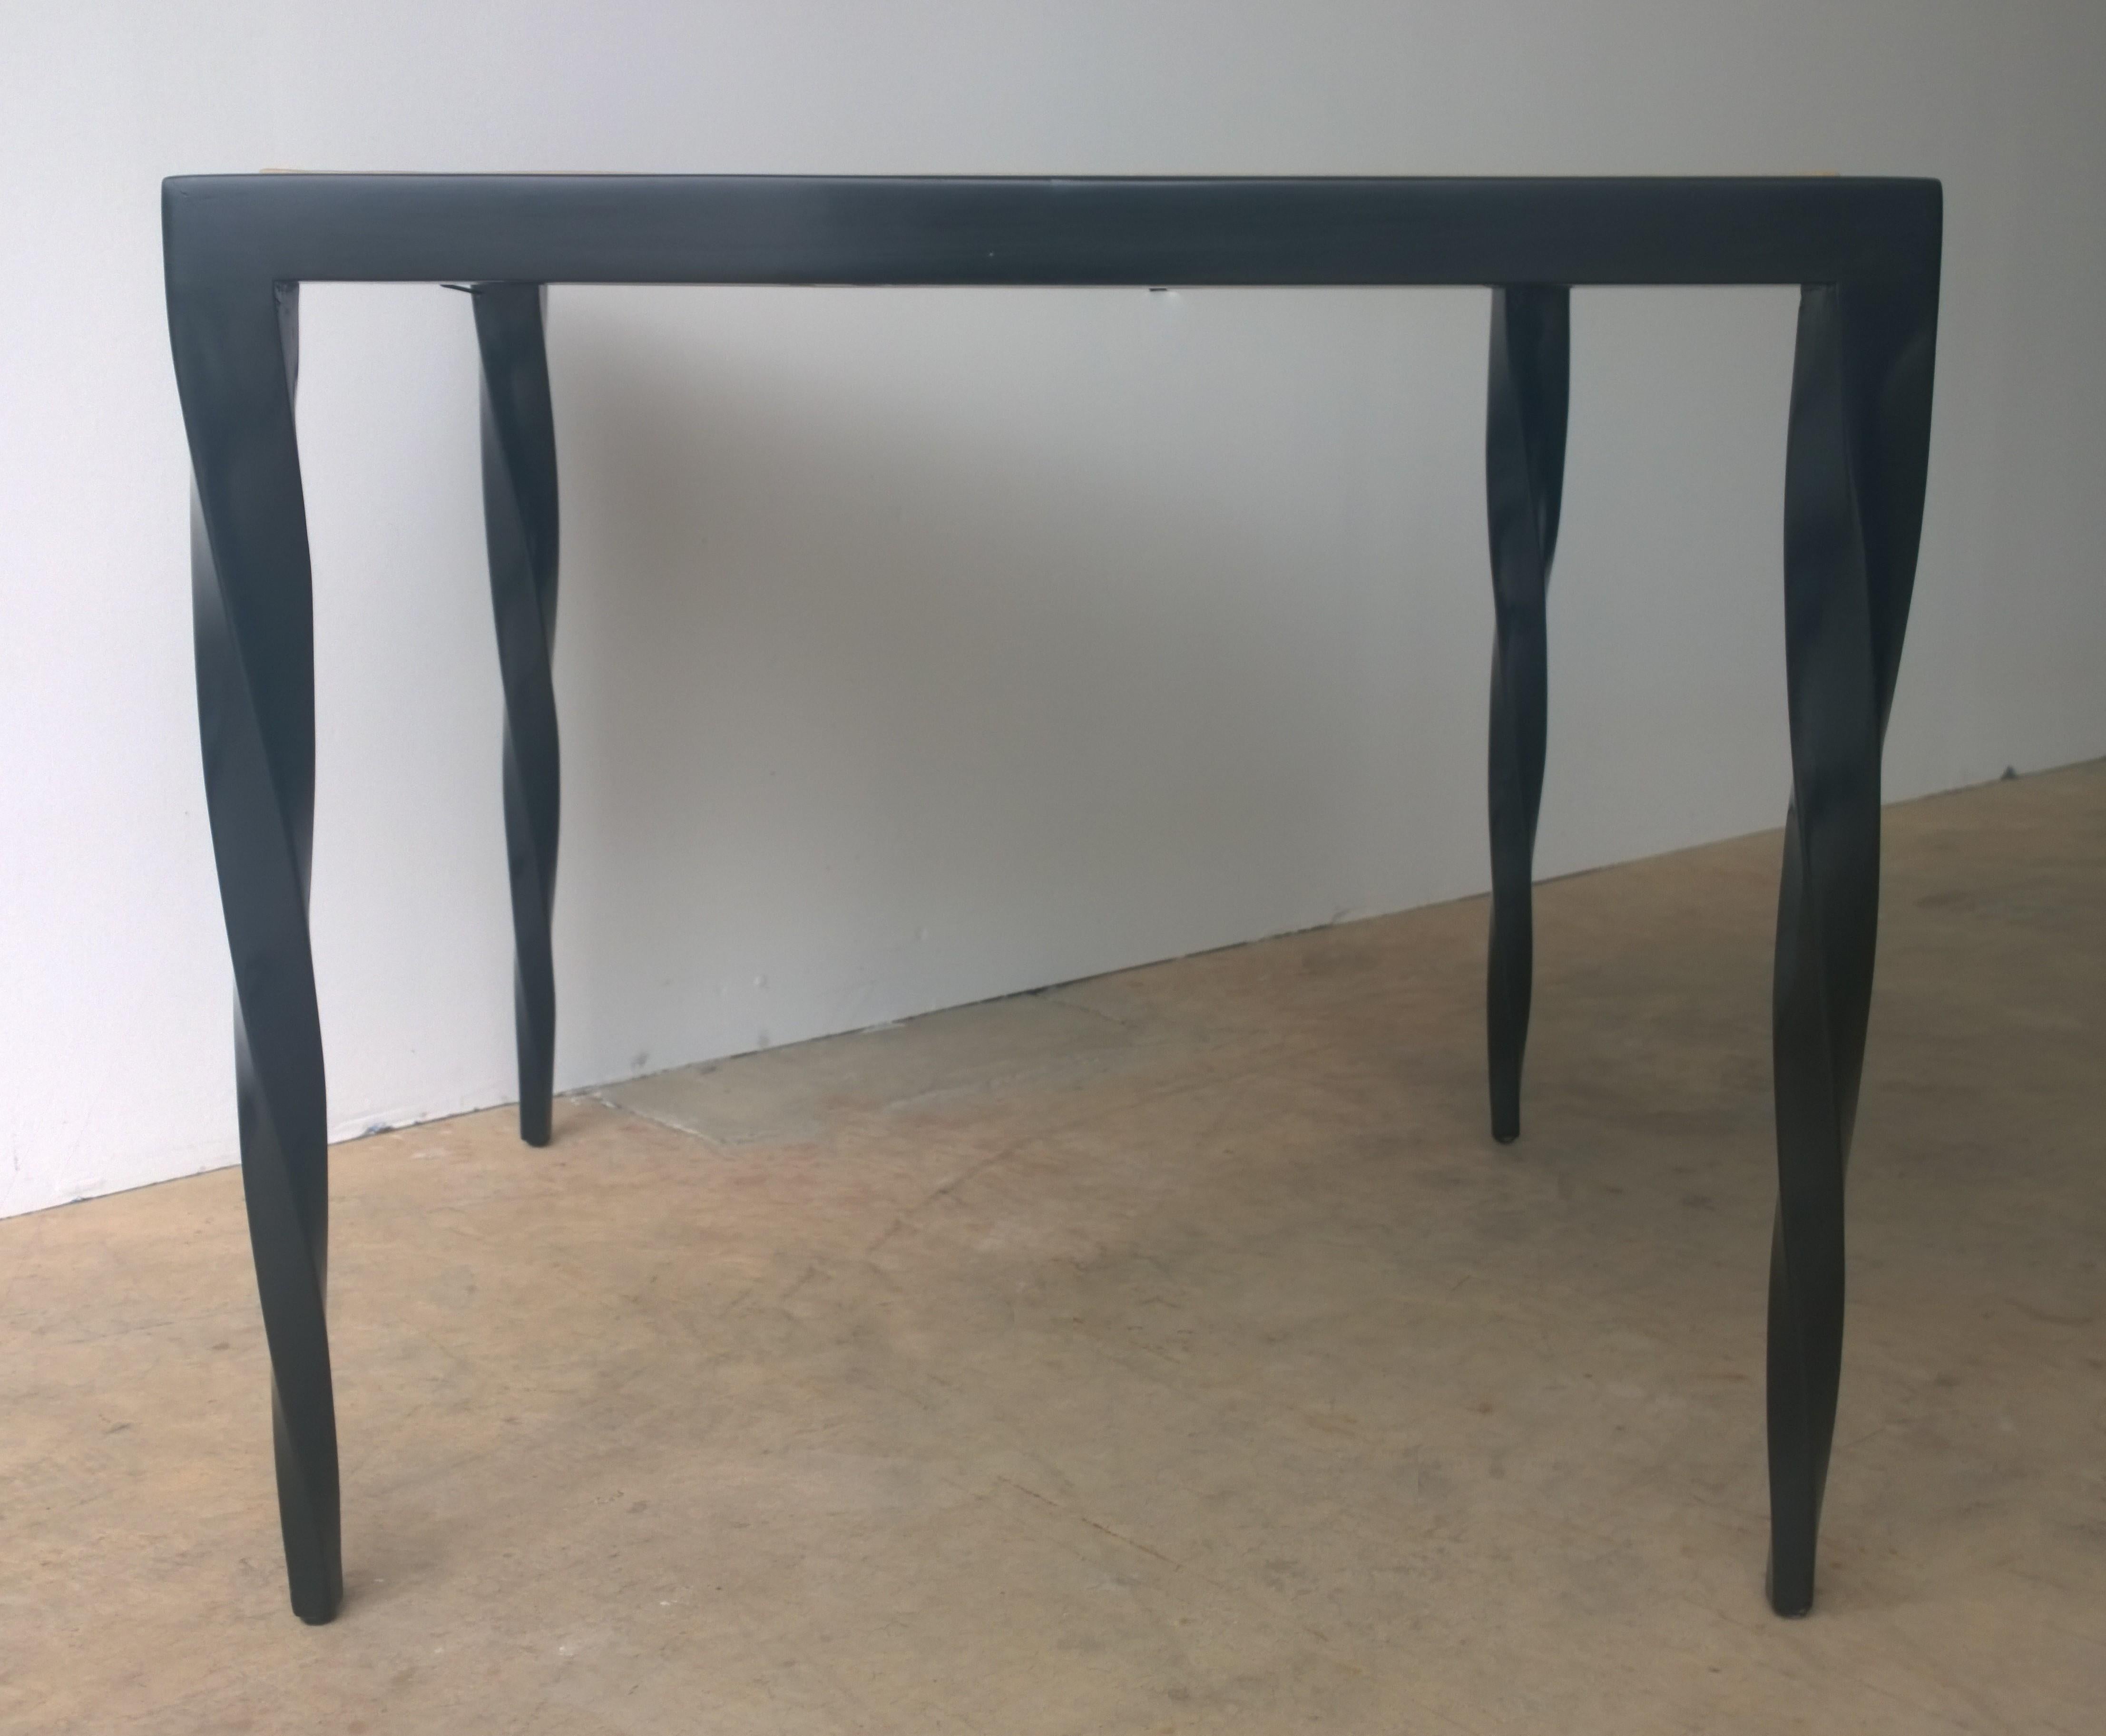 Offered is a Mid-Century Modern Johan Tapp square game table or small dining table with an ebony frame, tan leather top and four carved ebony legs. Johan Tapp designed and produced intricate wood pieces for Gumps department store in the 1940s-1950s.